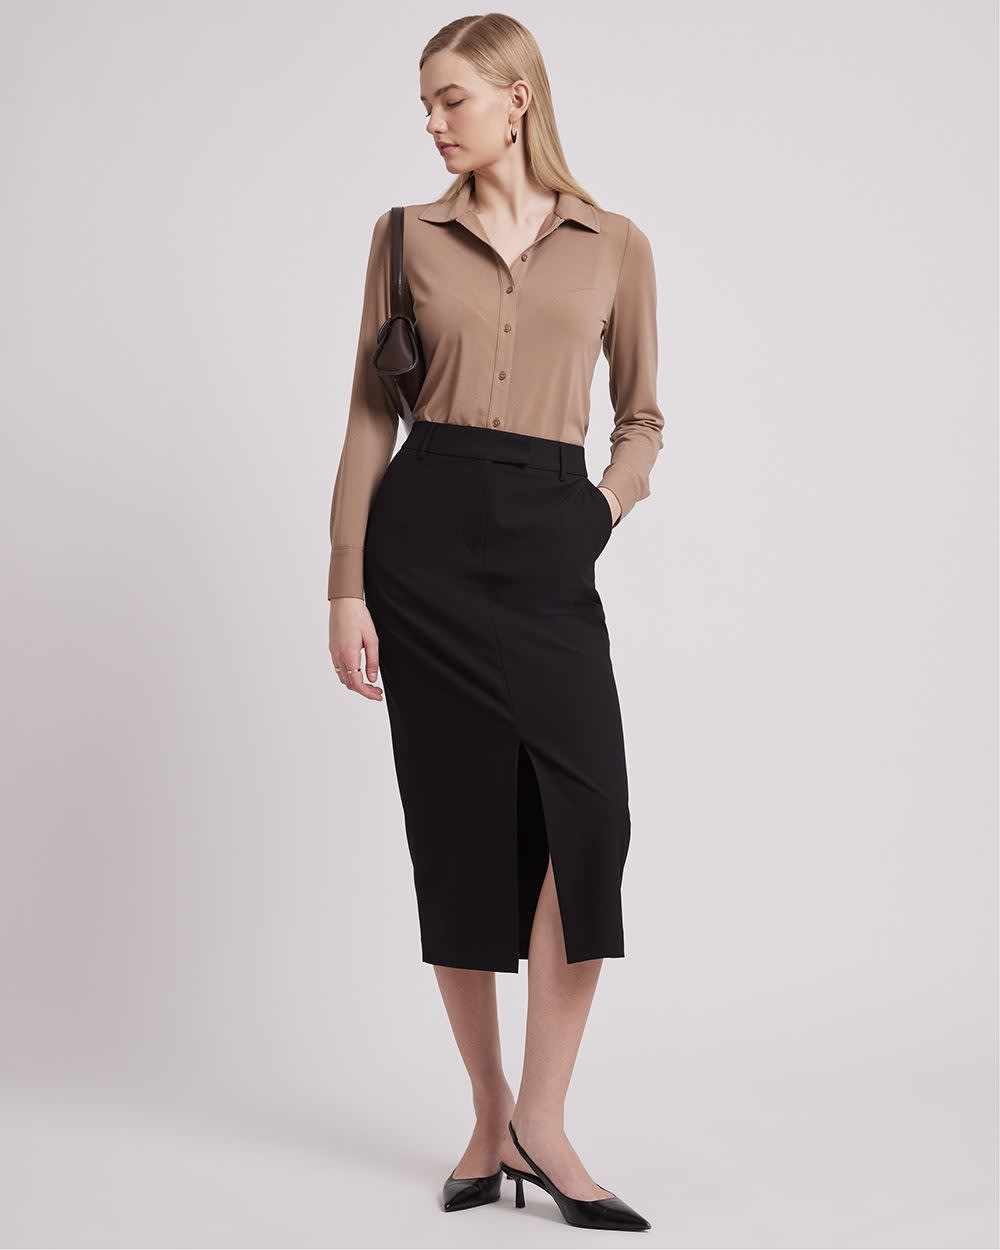 Long-Sleeve Buttoned-Down Crepe Shirt | RW&CO.